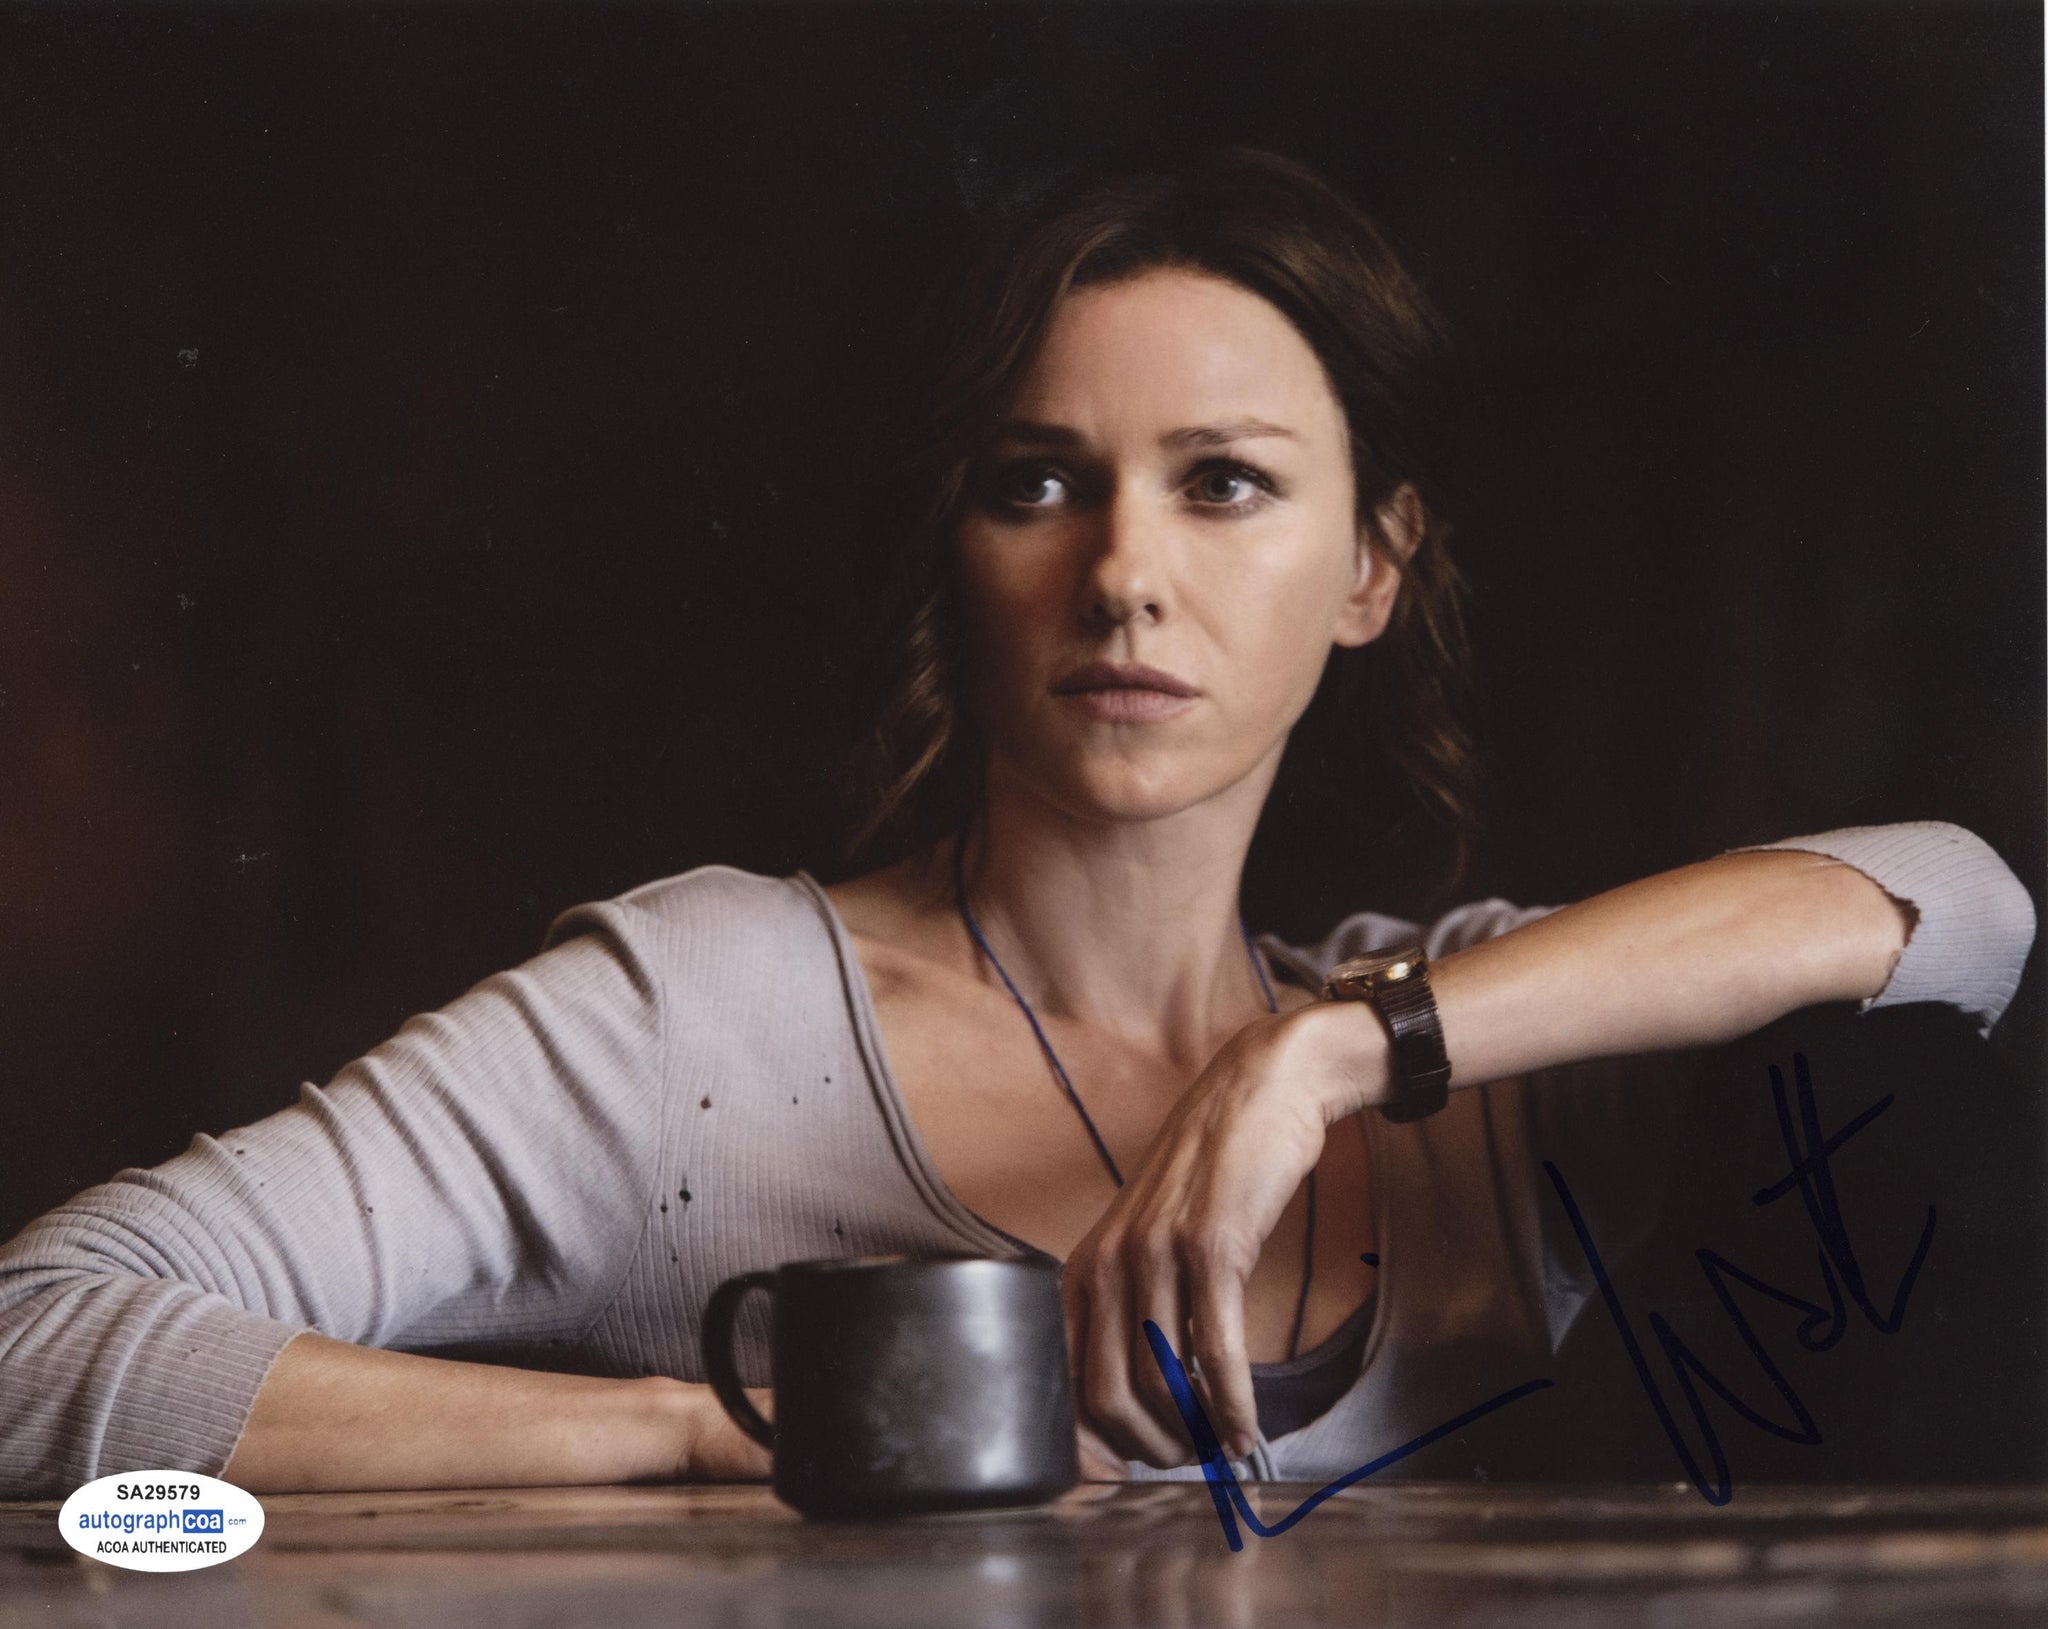 Naomi Watts Sexy Signed Autograph 8x10 Photo ACOA #4 - Outlaw Hobbies Authentic Autographs